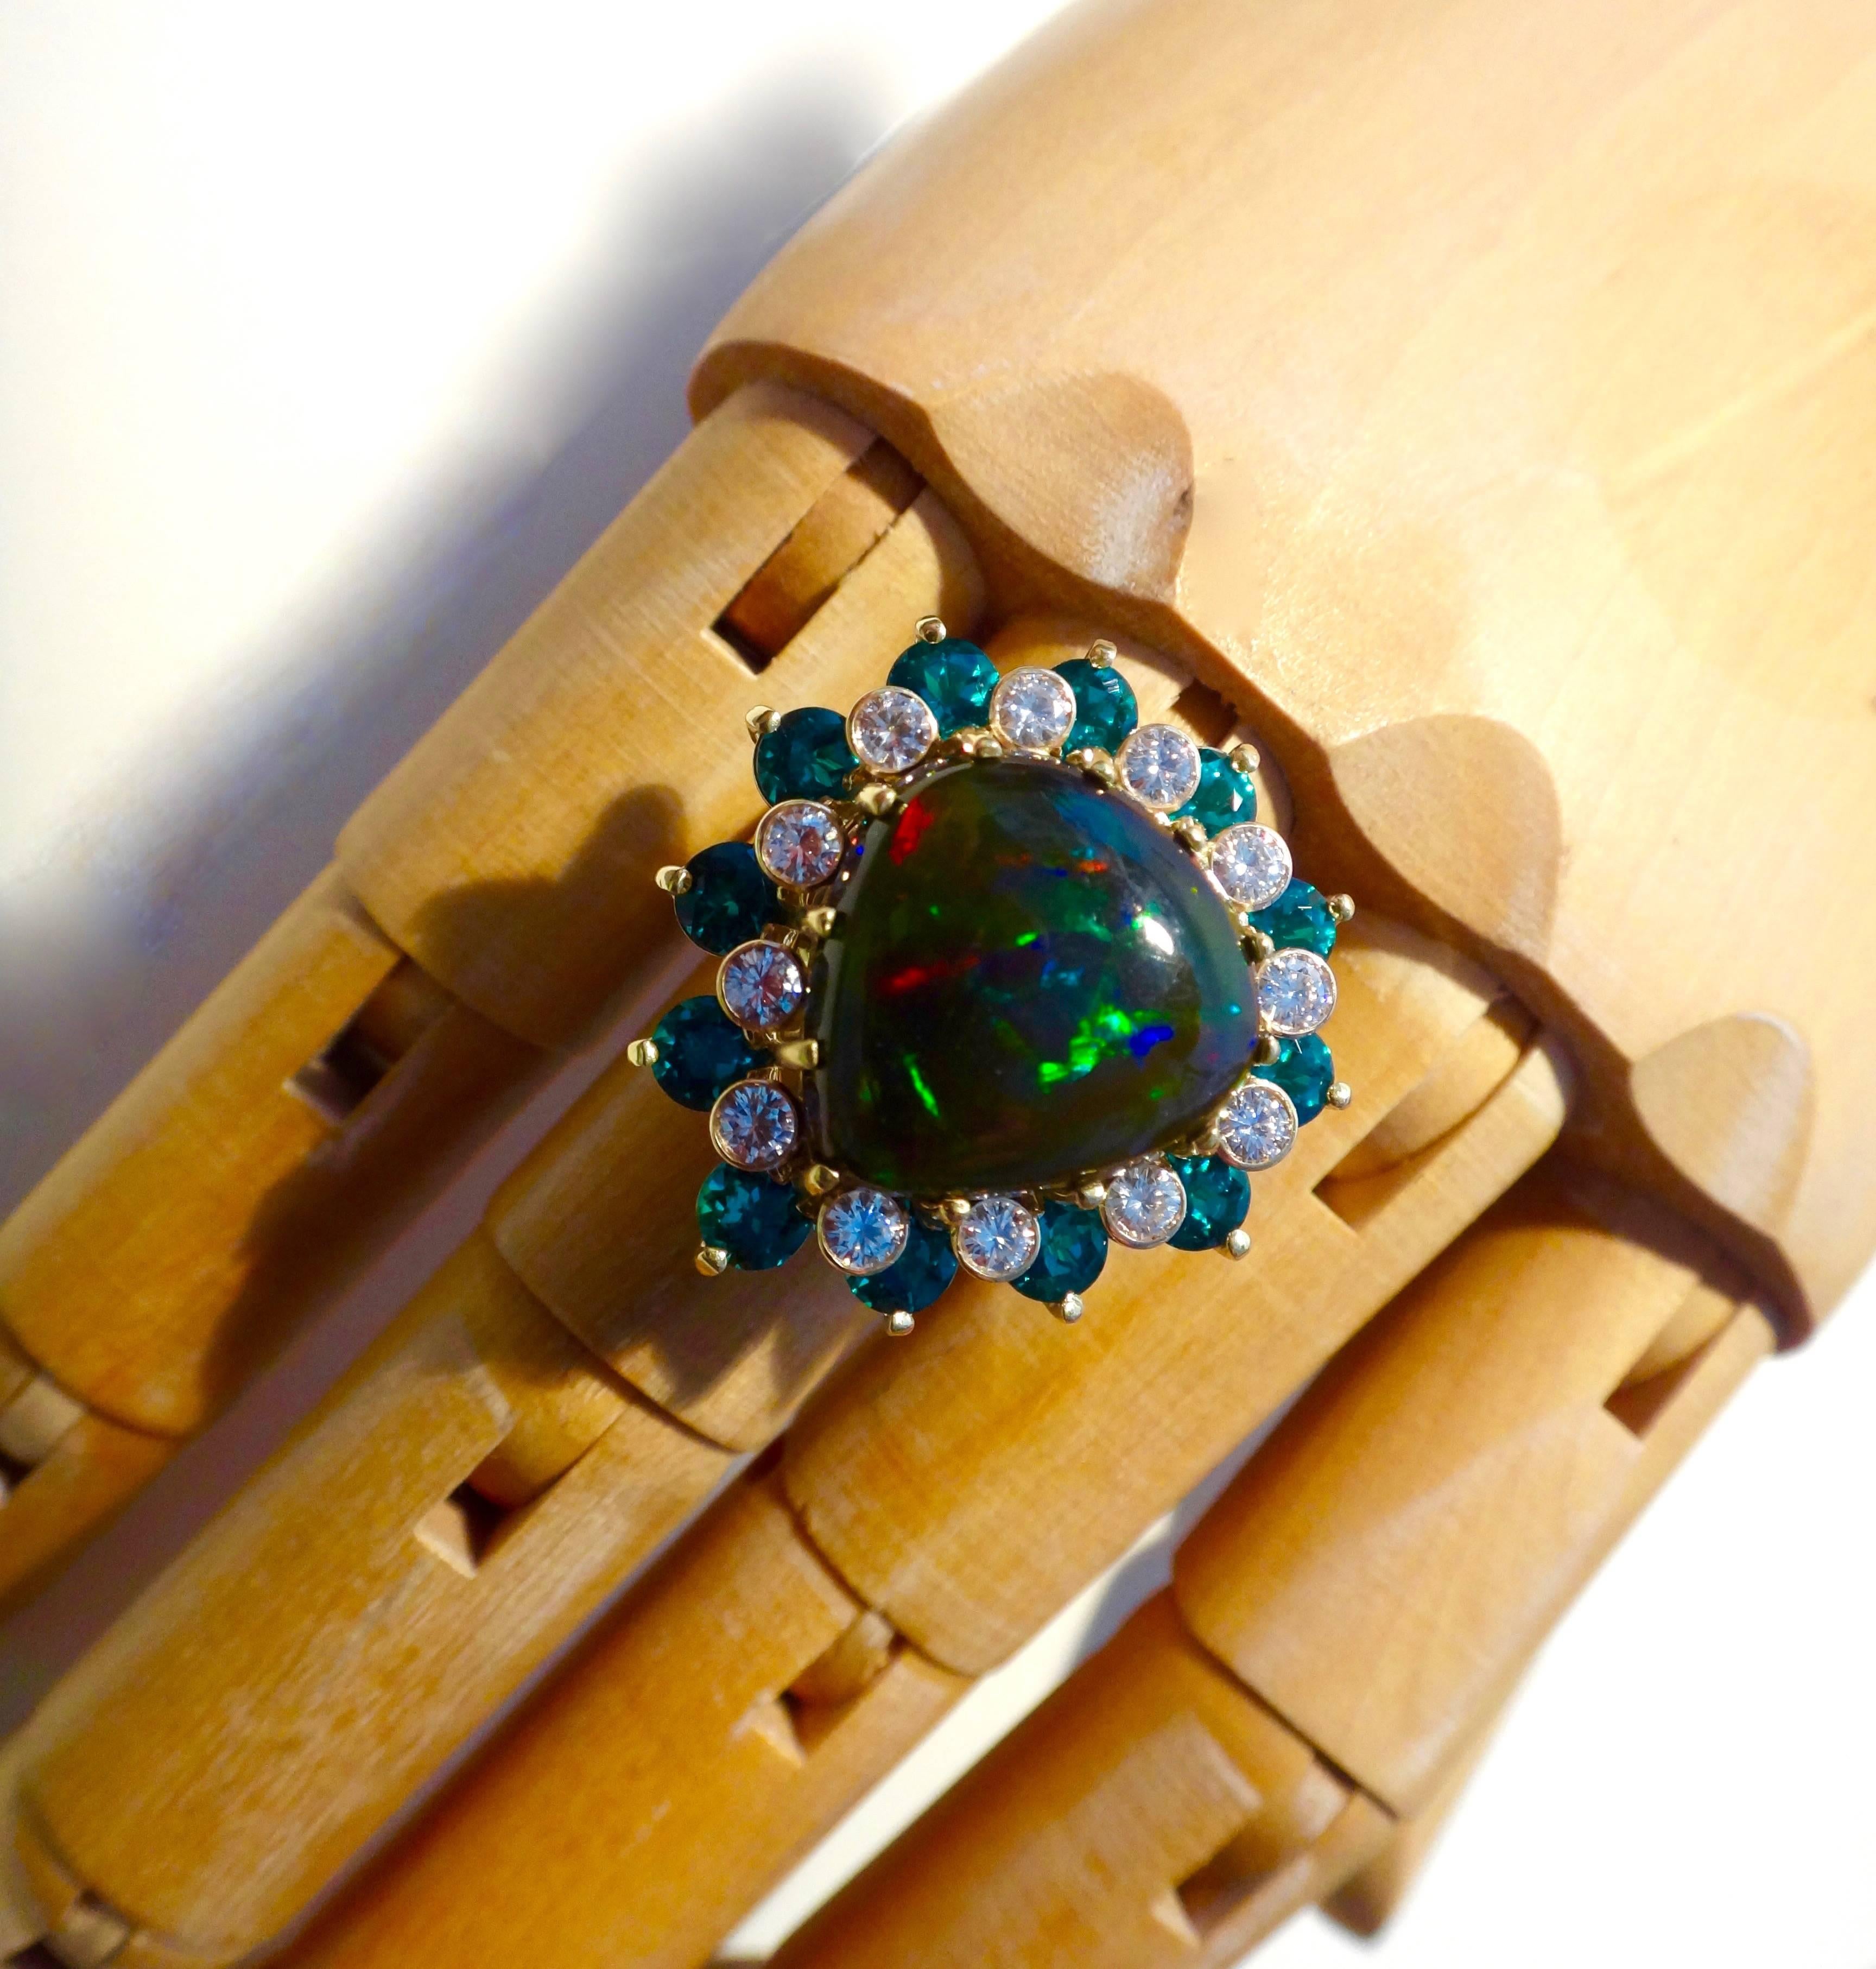 An Ethiopian black opal is the centerpiece of this bold and dramatic cocktail ring.  The pear shaped gem has a dark green/black matrix with a broad range of colors that flash and glitter as the ring moves.  The opal is complimented with rows of